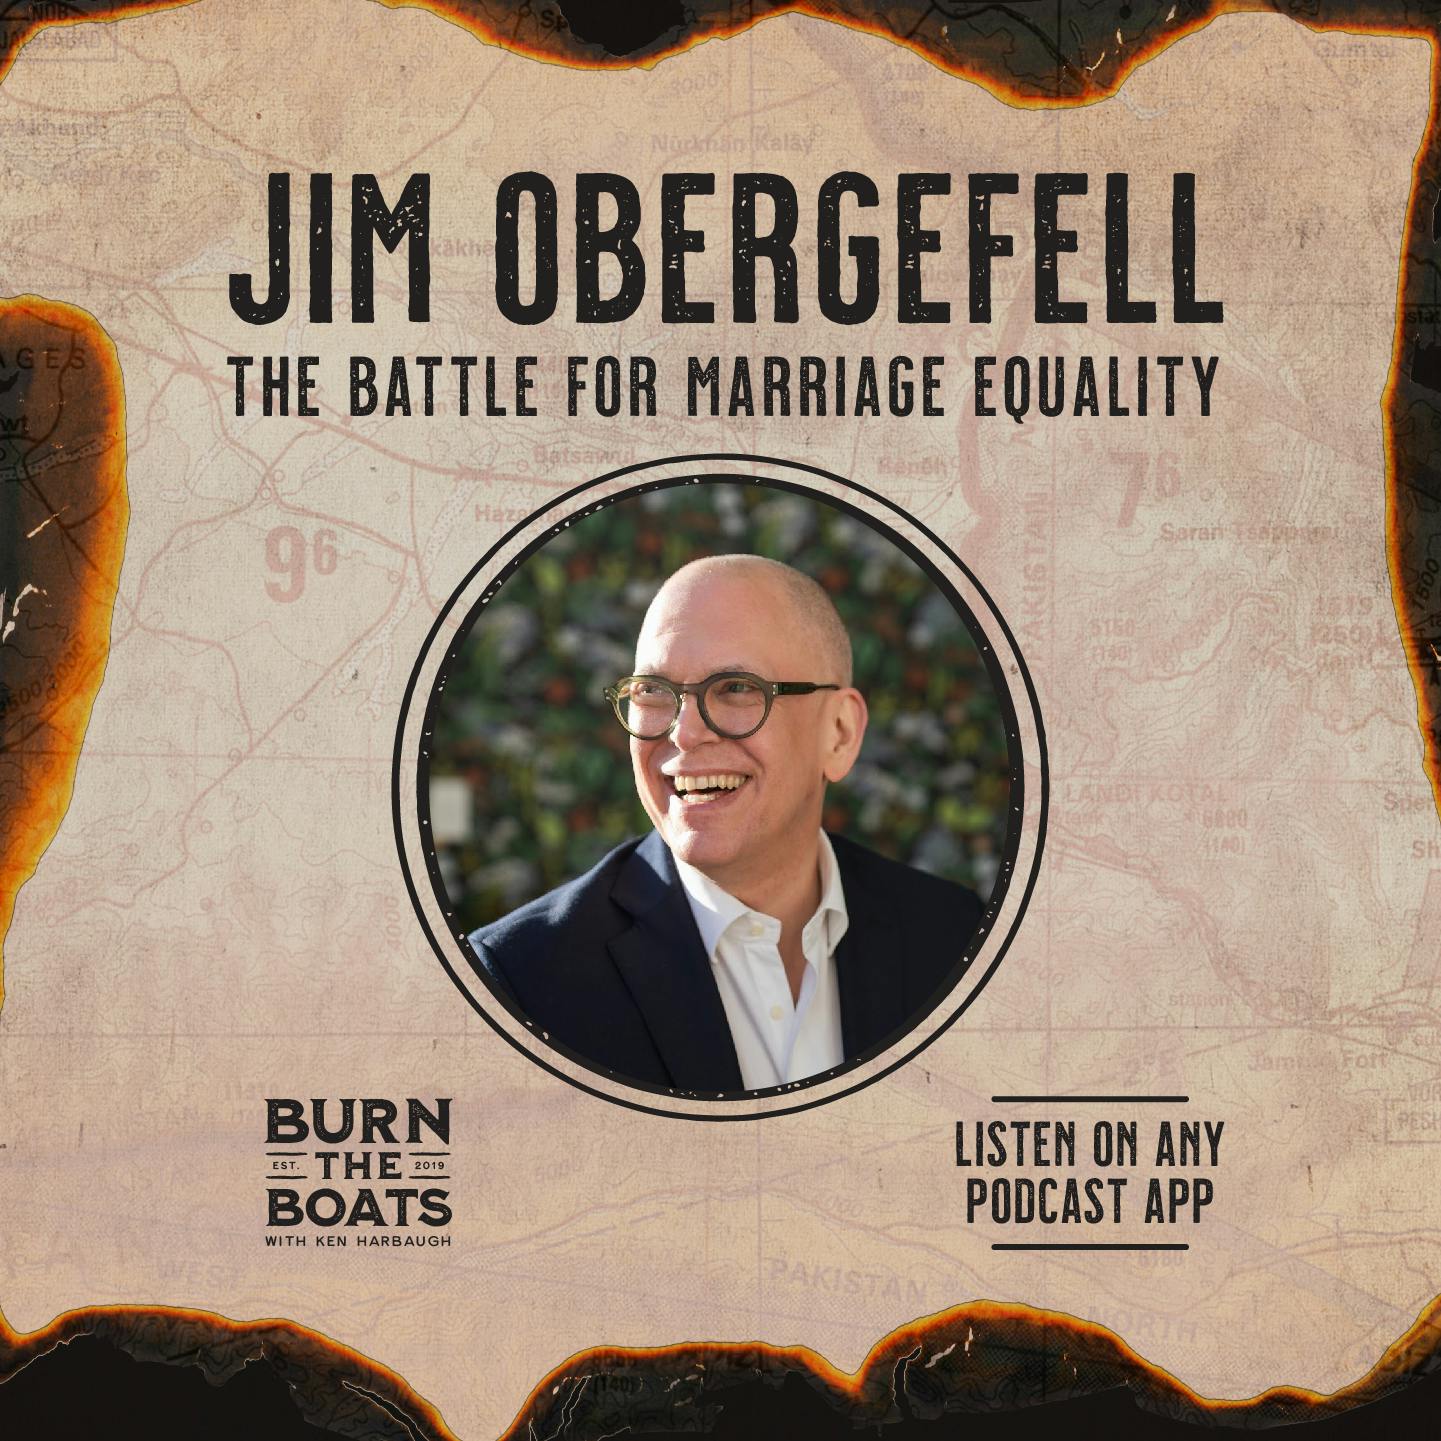 BONUS: Jim Obergefell: The Battle for Marriage Equality